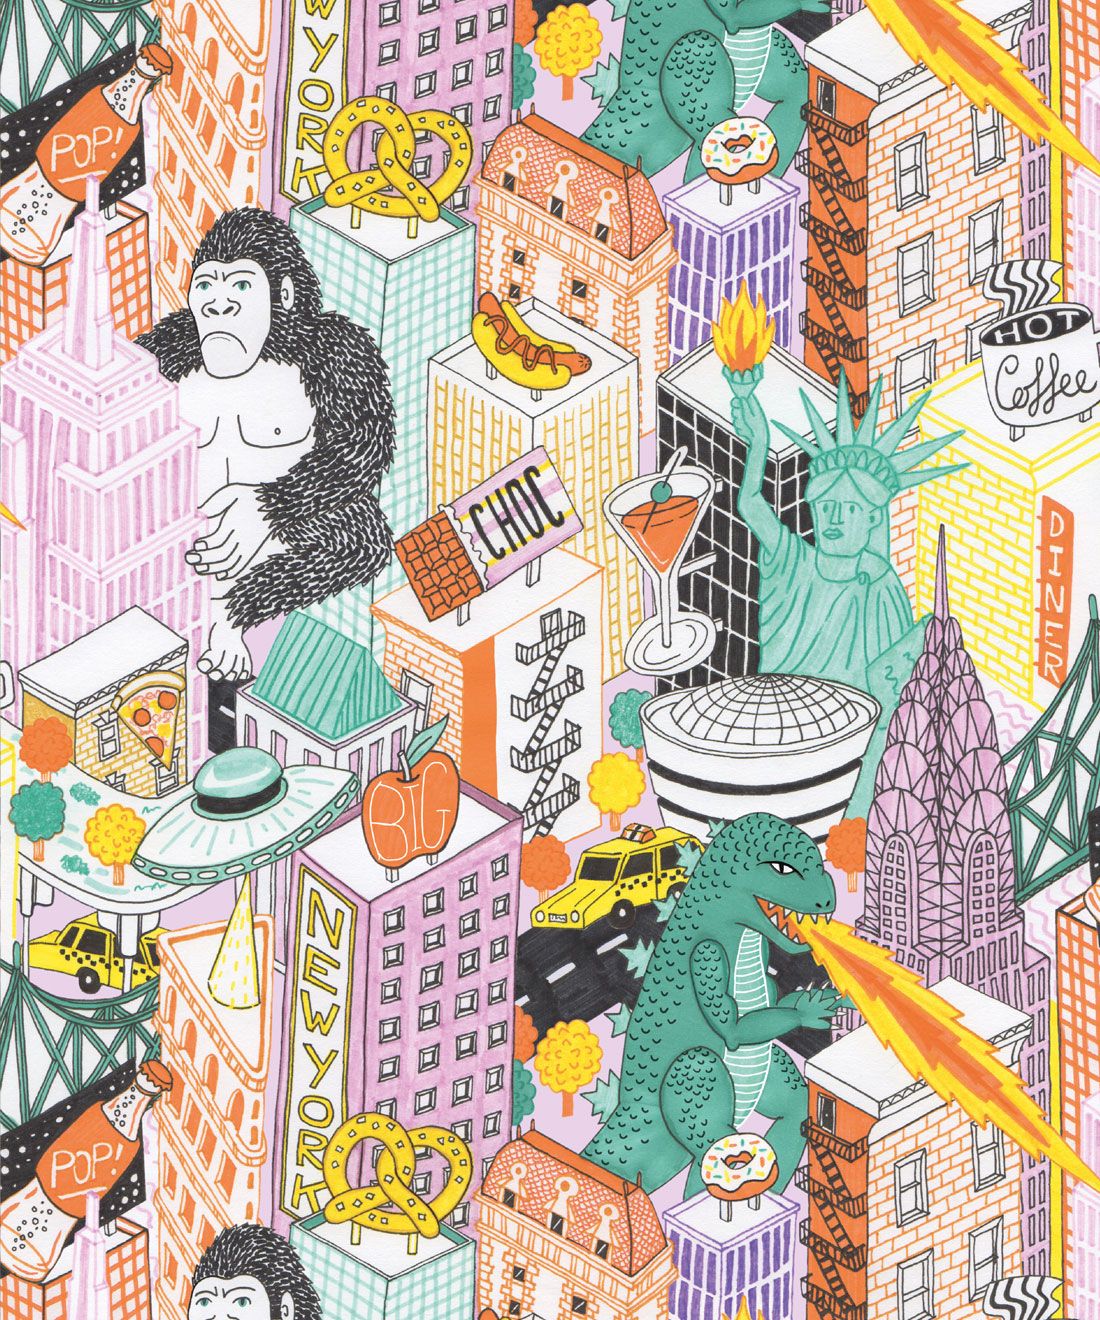 New York Wallpaper by Jacqueline Colley featuring Godzilla, King Kong, a UFO, buildings and the statue of liberty swatch